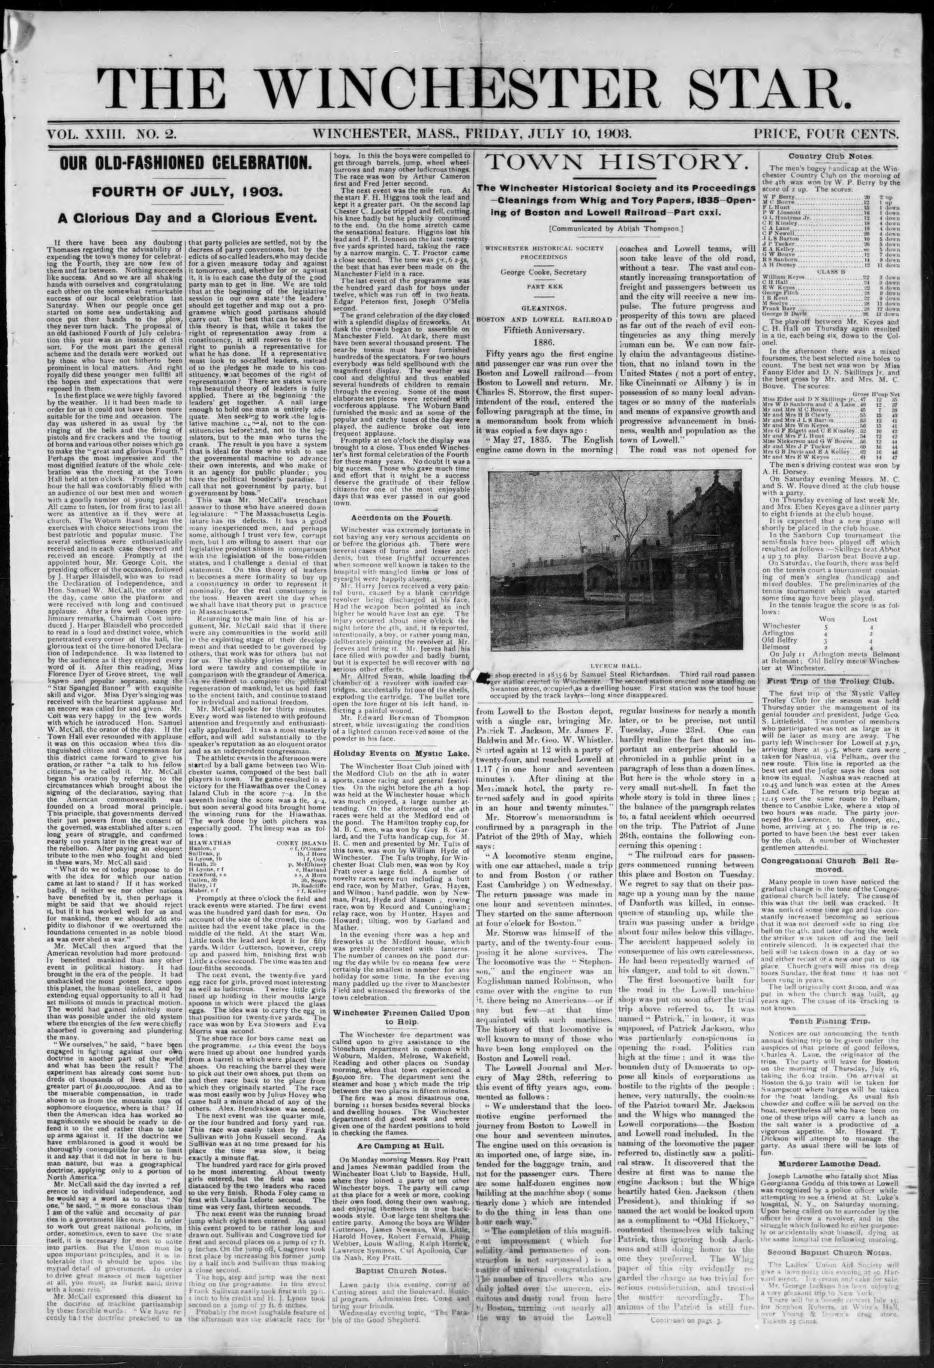 Michigan Daily Digital Archives - February 18, 1925 (vol. 35, iss